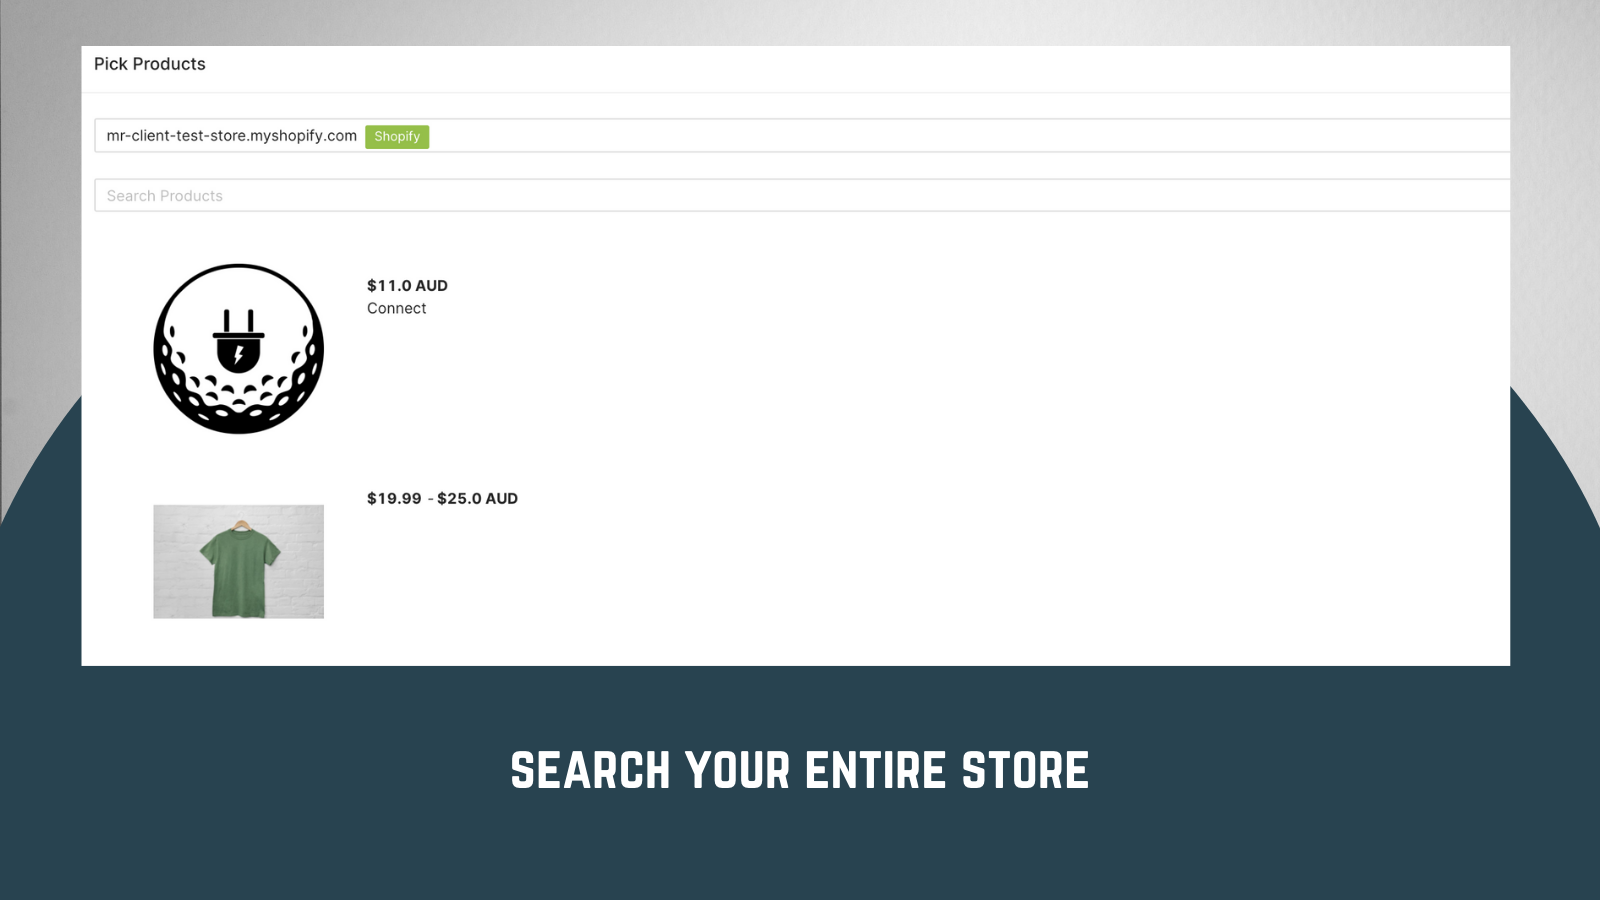 Search Your Entire Store